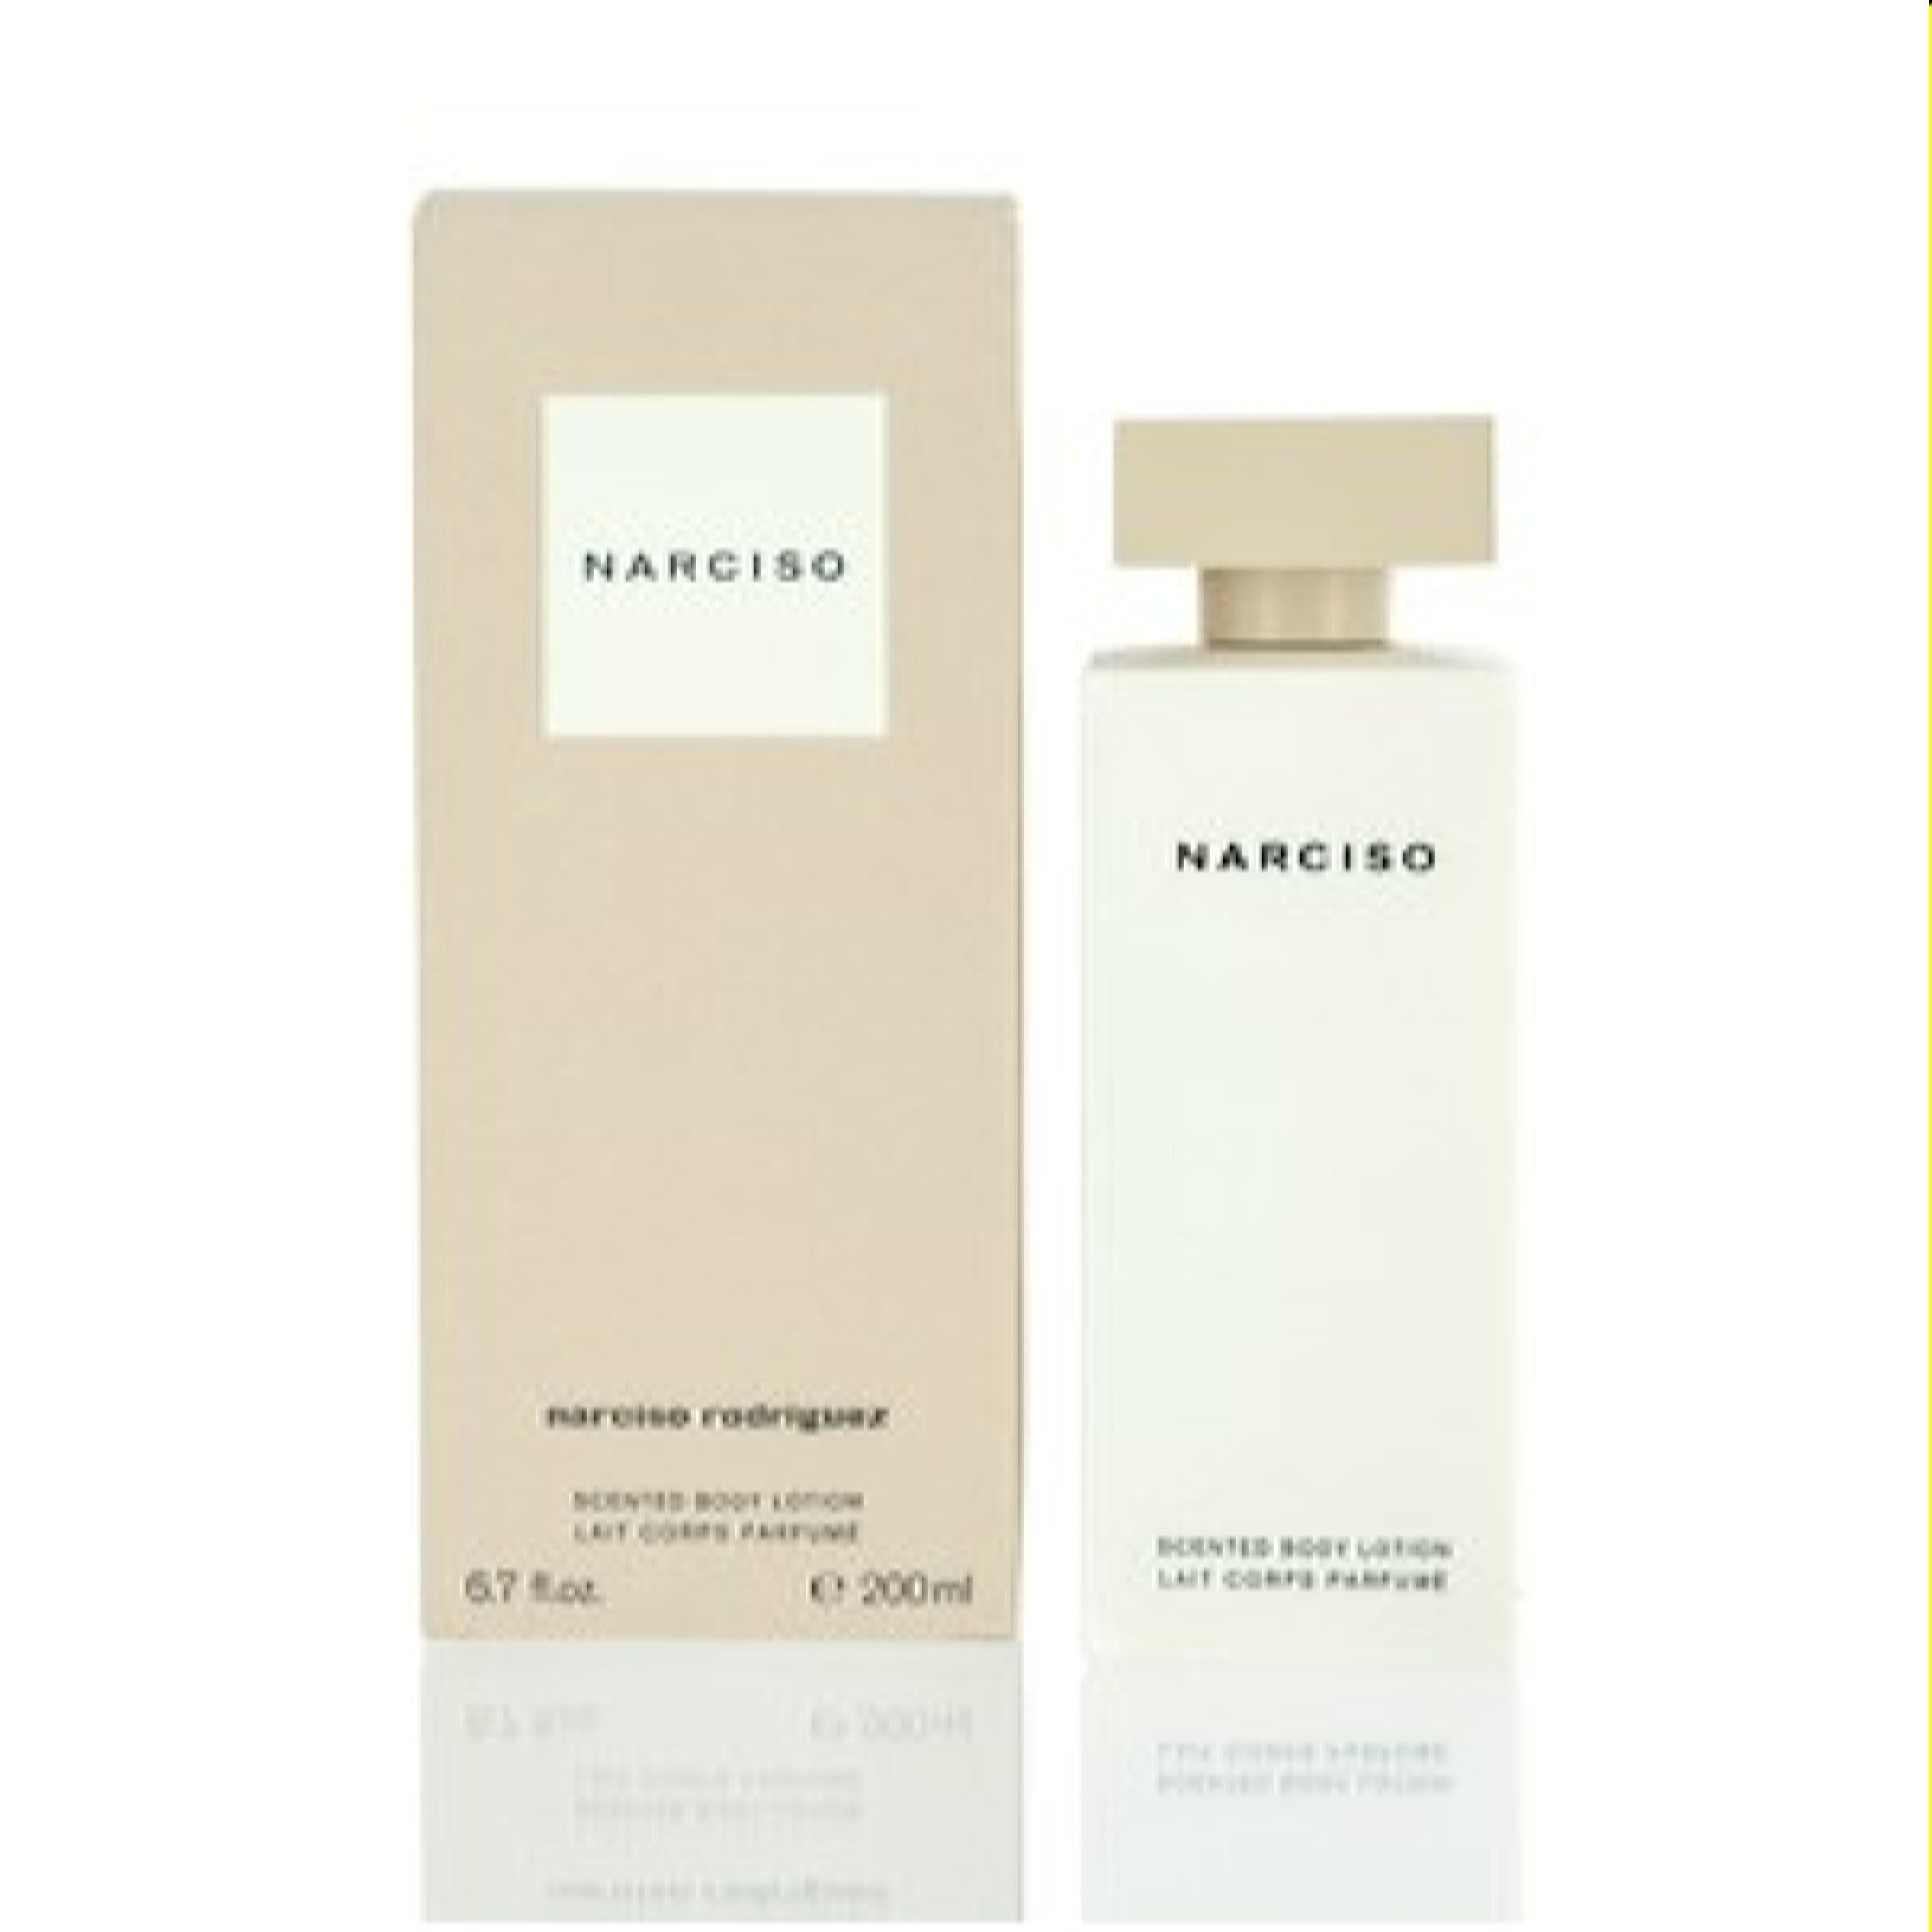 Eastern relæ gas Narciso Rodriguez For Her Narciso Rodriguez Body Lotion Box Sl. 6.7 Oz -  Bezali